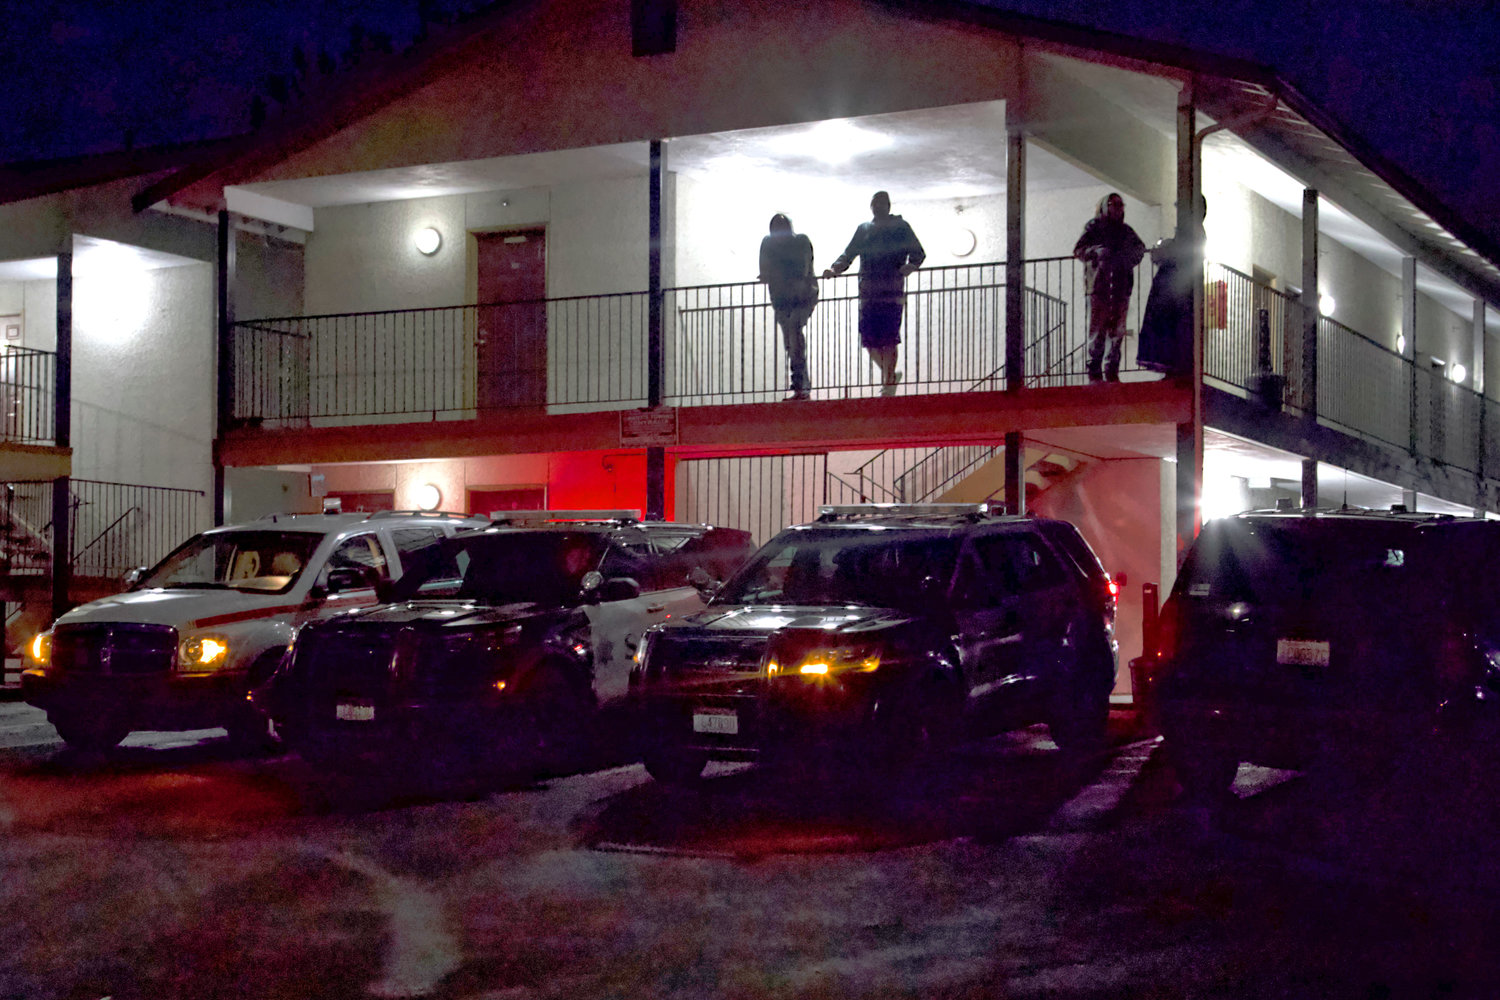 Bystanders at the King Oscar Motel in the 1100 block of Eckerson Road watch a standoff between law enforcement and an armed individual occurring on private property across the street Sunday night. 